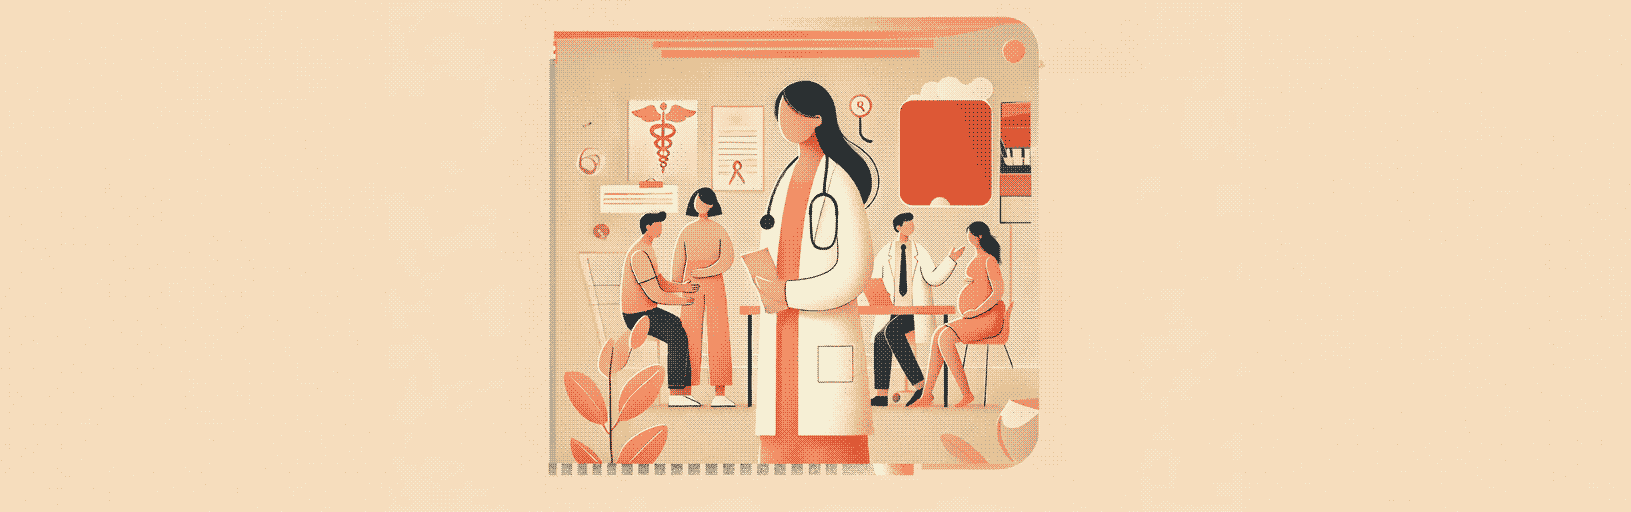 Minimalist illustration of a Spital Clinic GP interacting with patients, including a pregnant woman, in a supportive environment. The design uses light orange and baby pink tones, representing the partnership with London Pregnancy Clinic, and emphasises holistic care and reassurance.